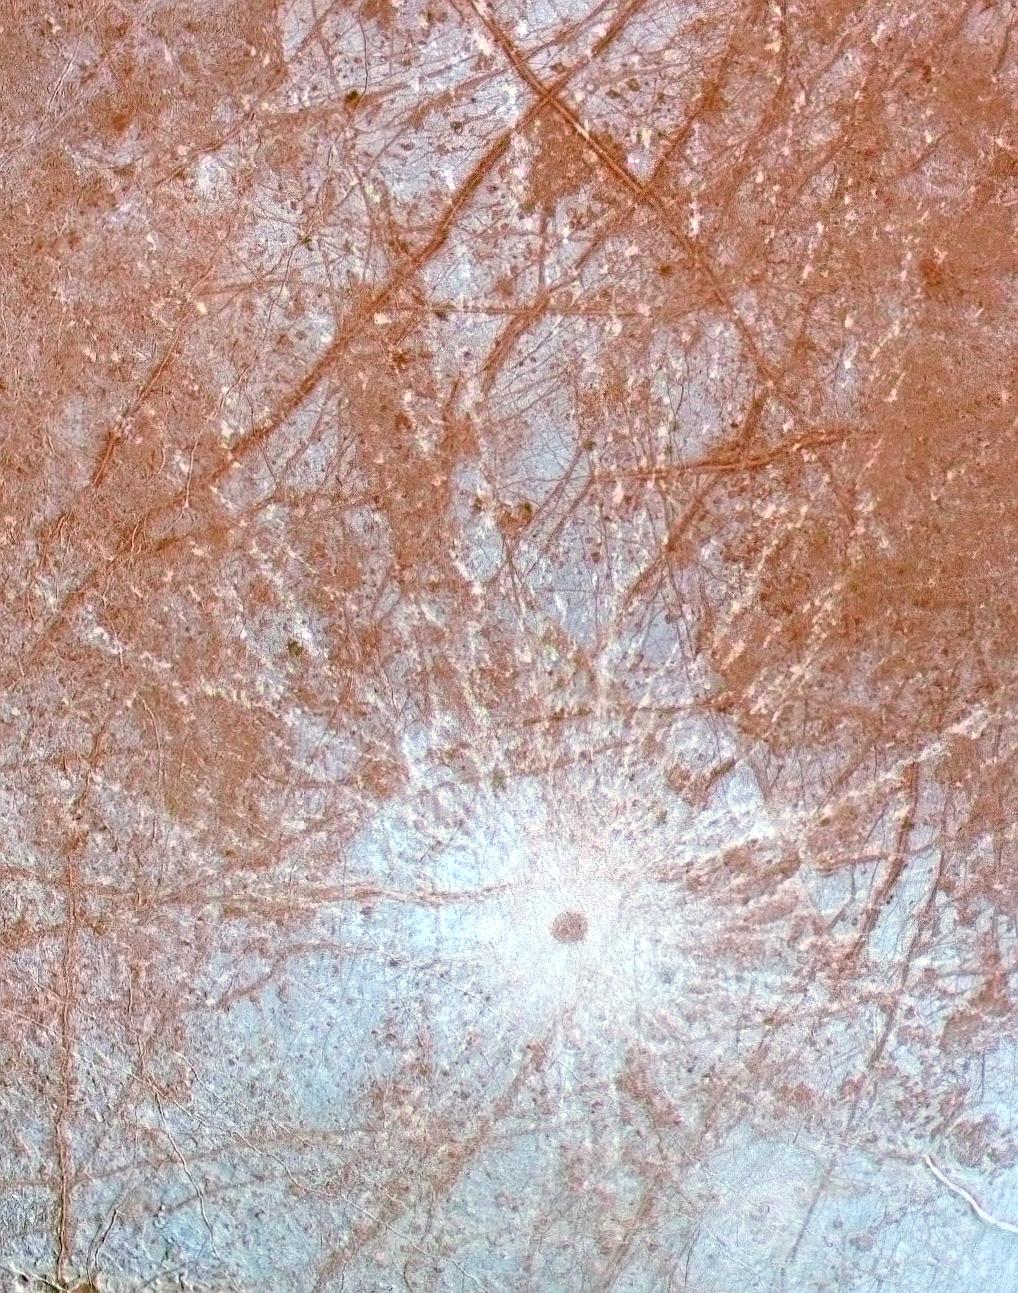 Bright white impact crater on Europa.